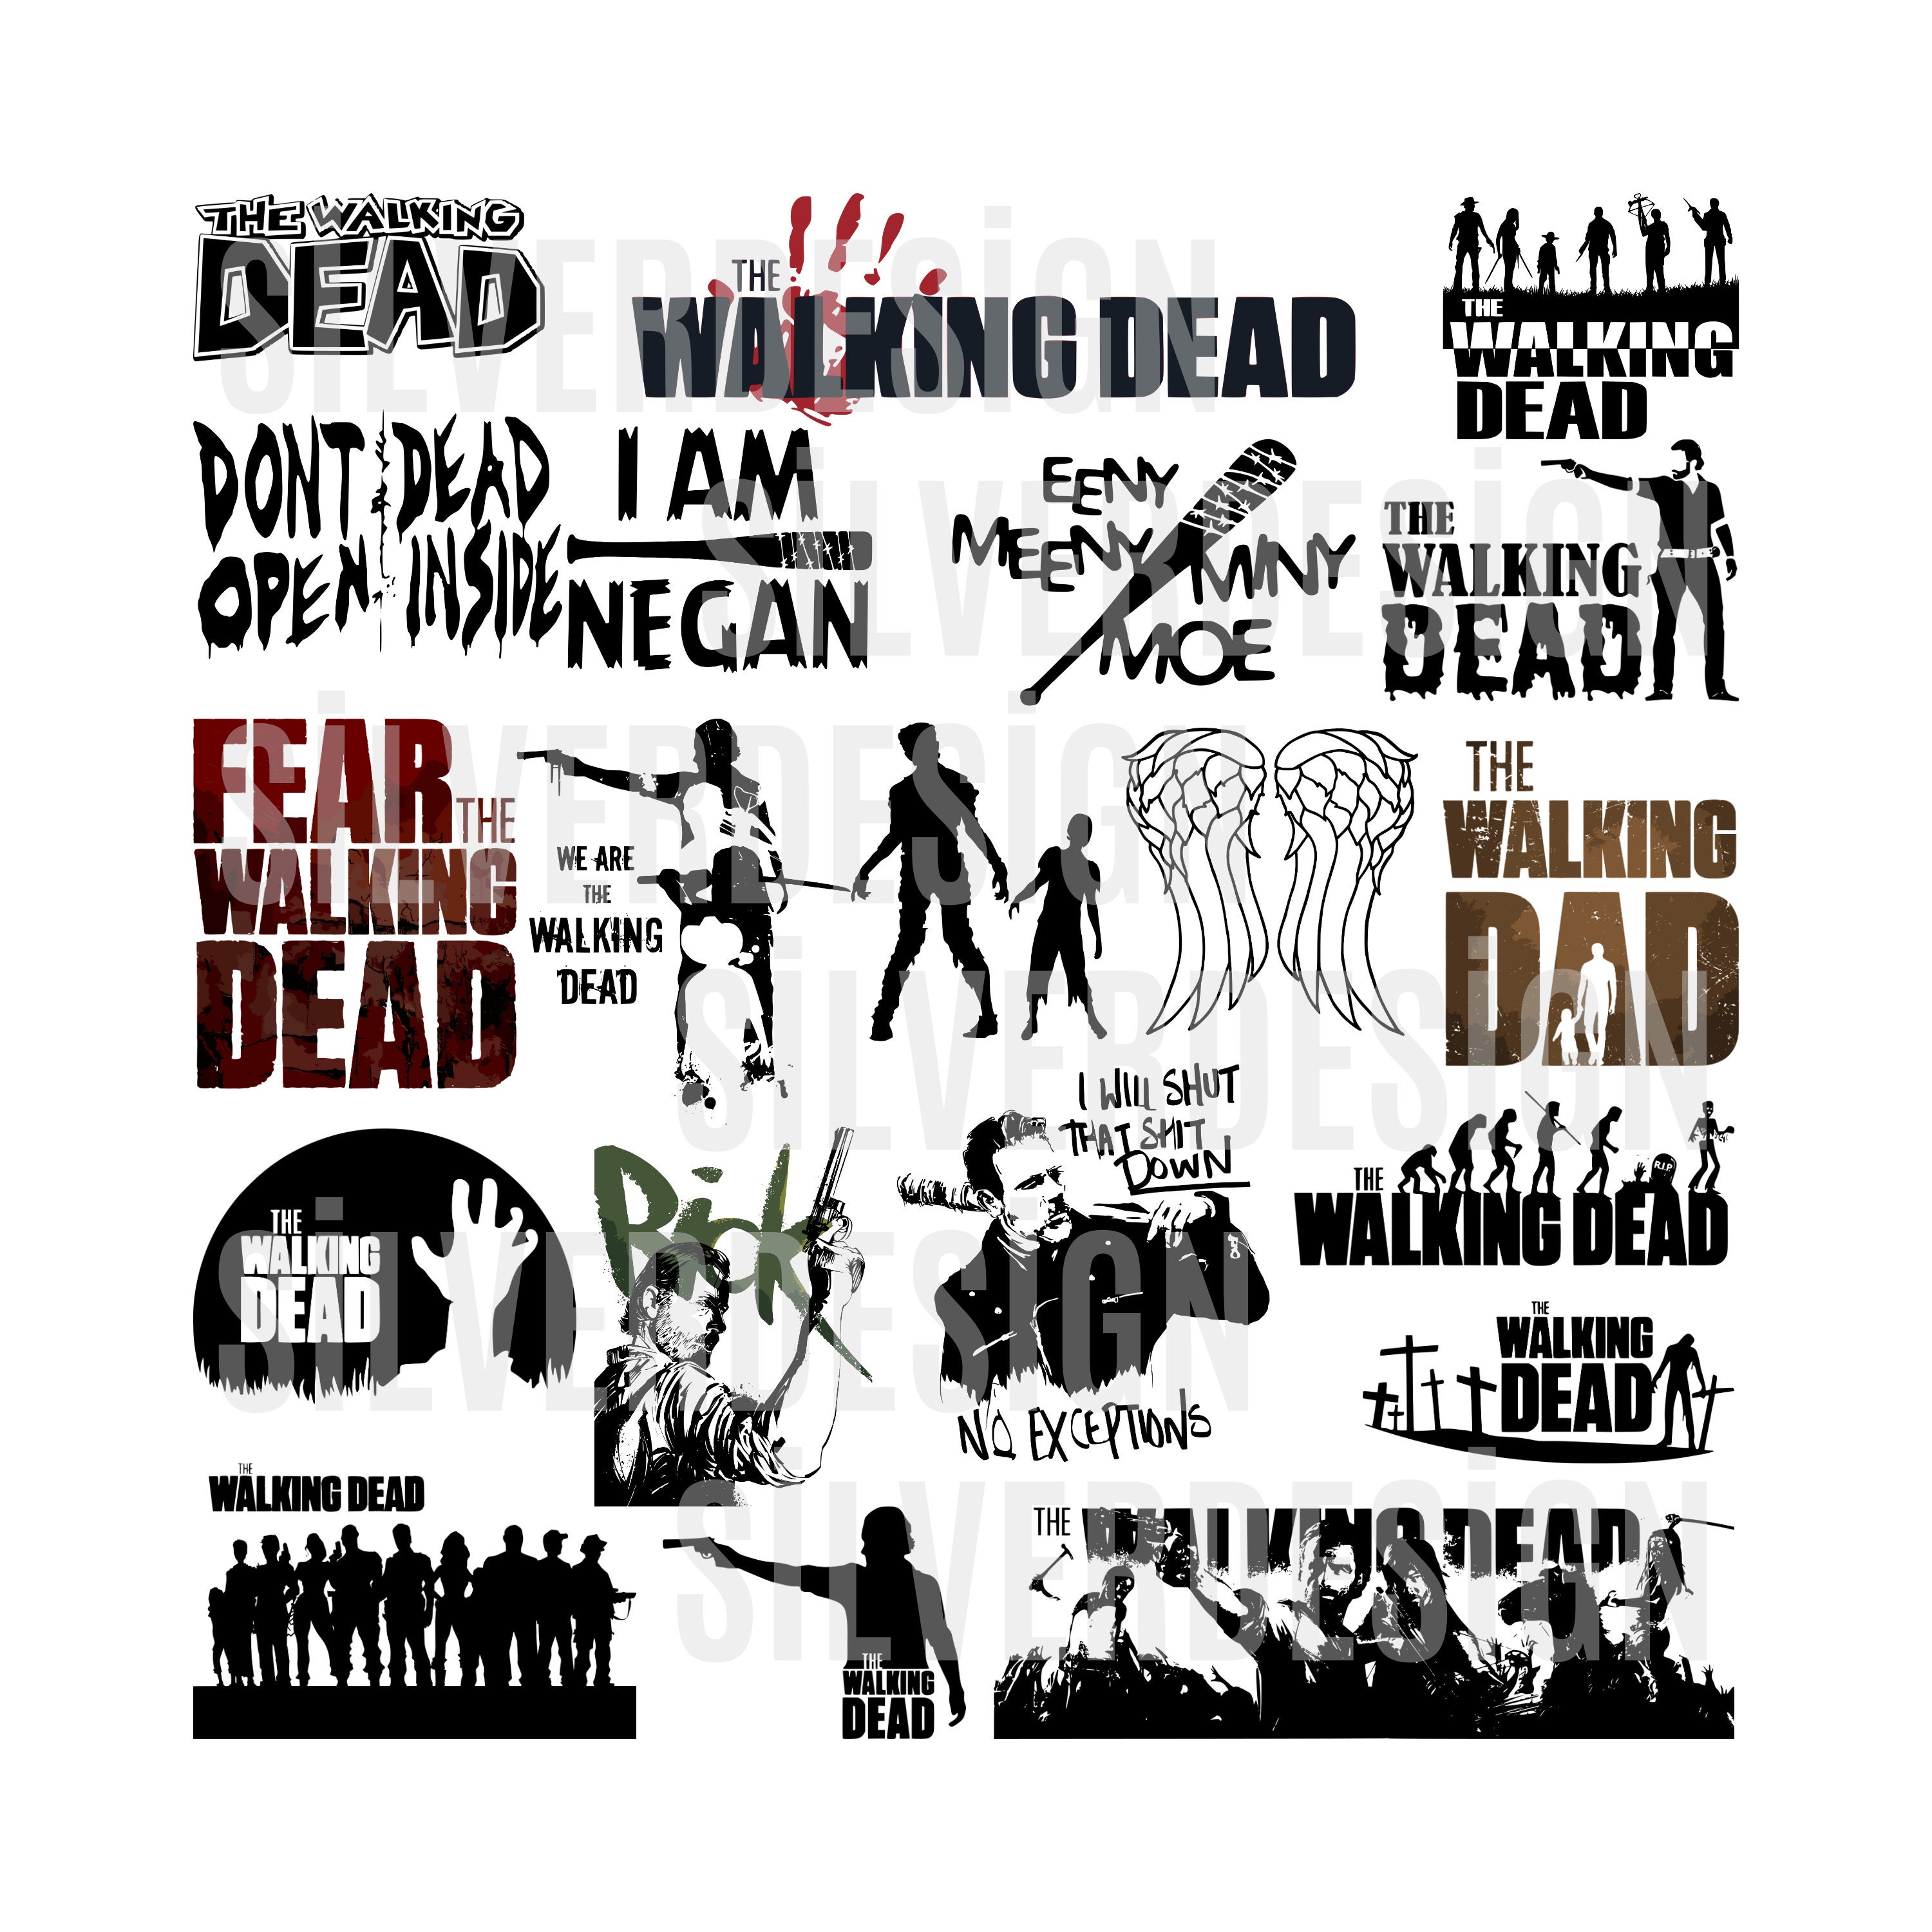 Tales of the Walking Dead Poster for Home Decor Wall Art 12 x 18